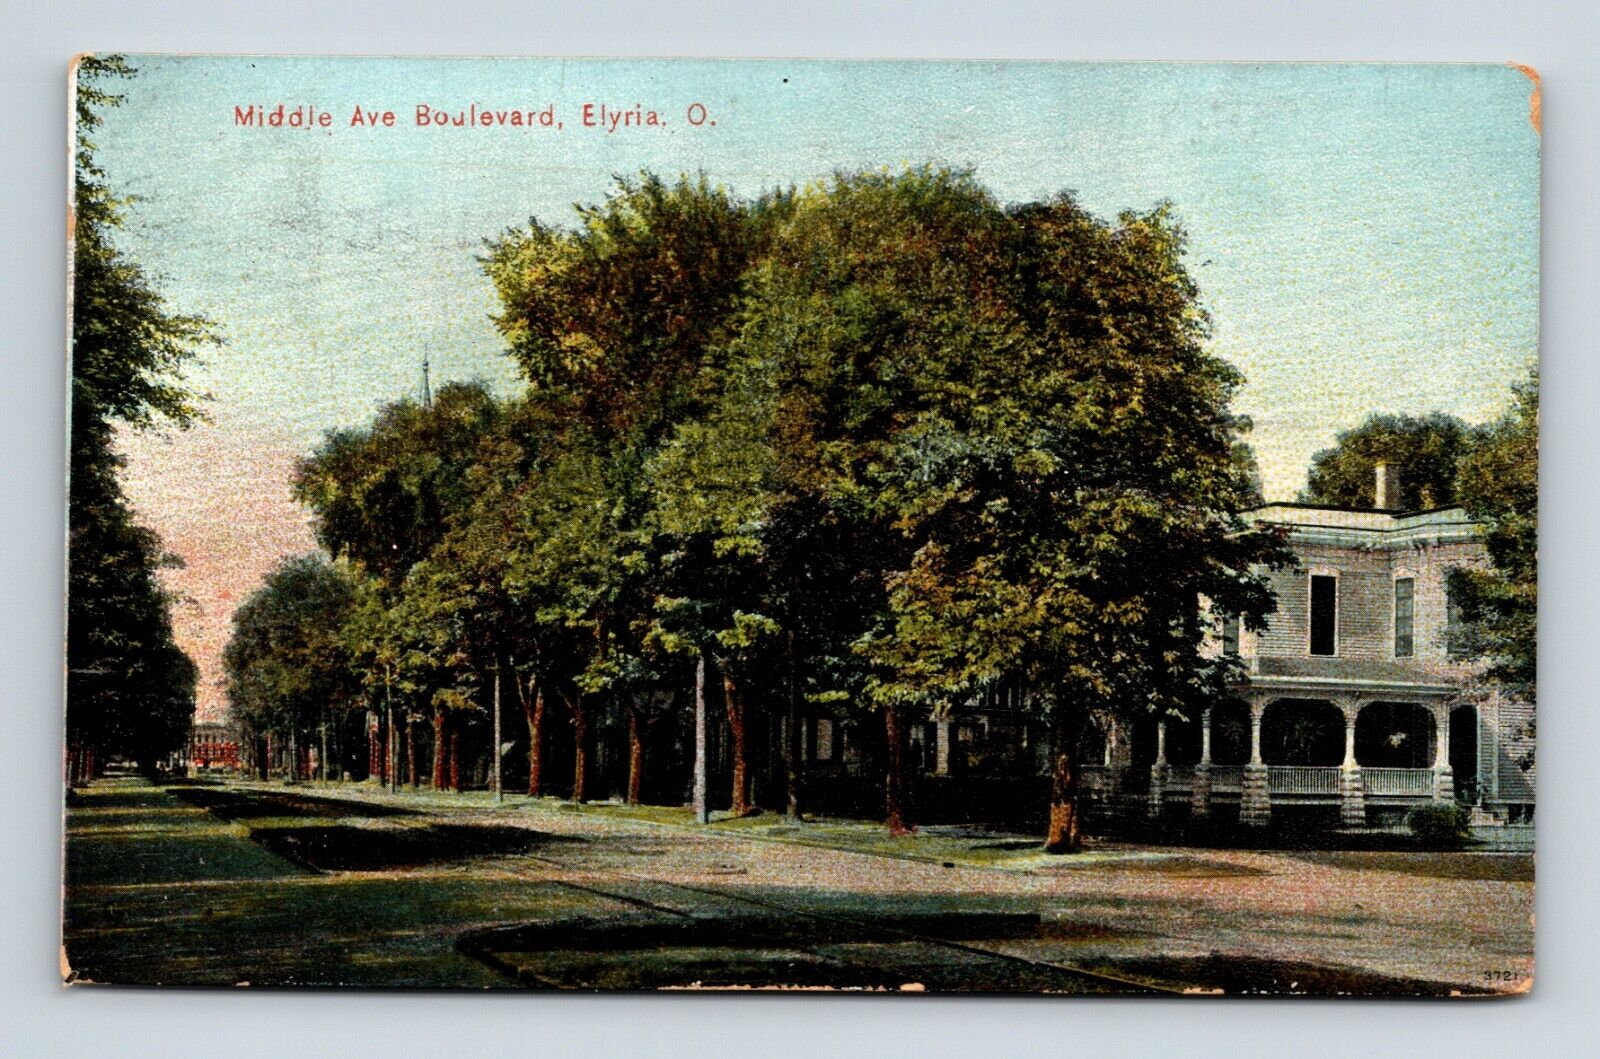 ELYRIA OHIO OH OLD HOMES ON MIDDLE AVE BOULEVARD POSTCARD A-8